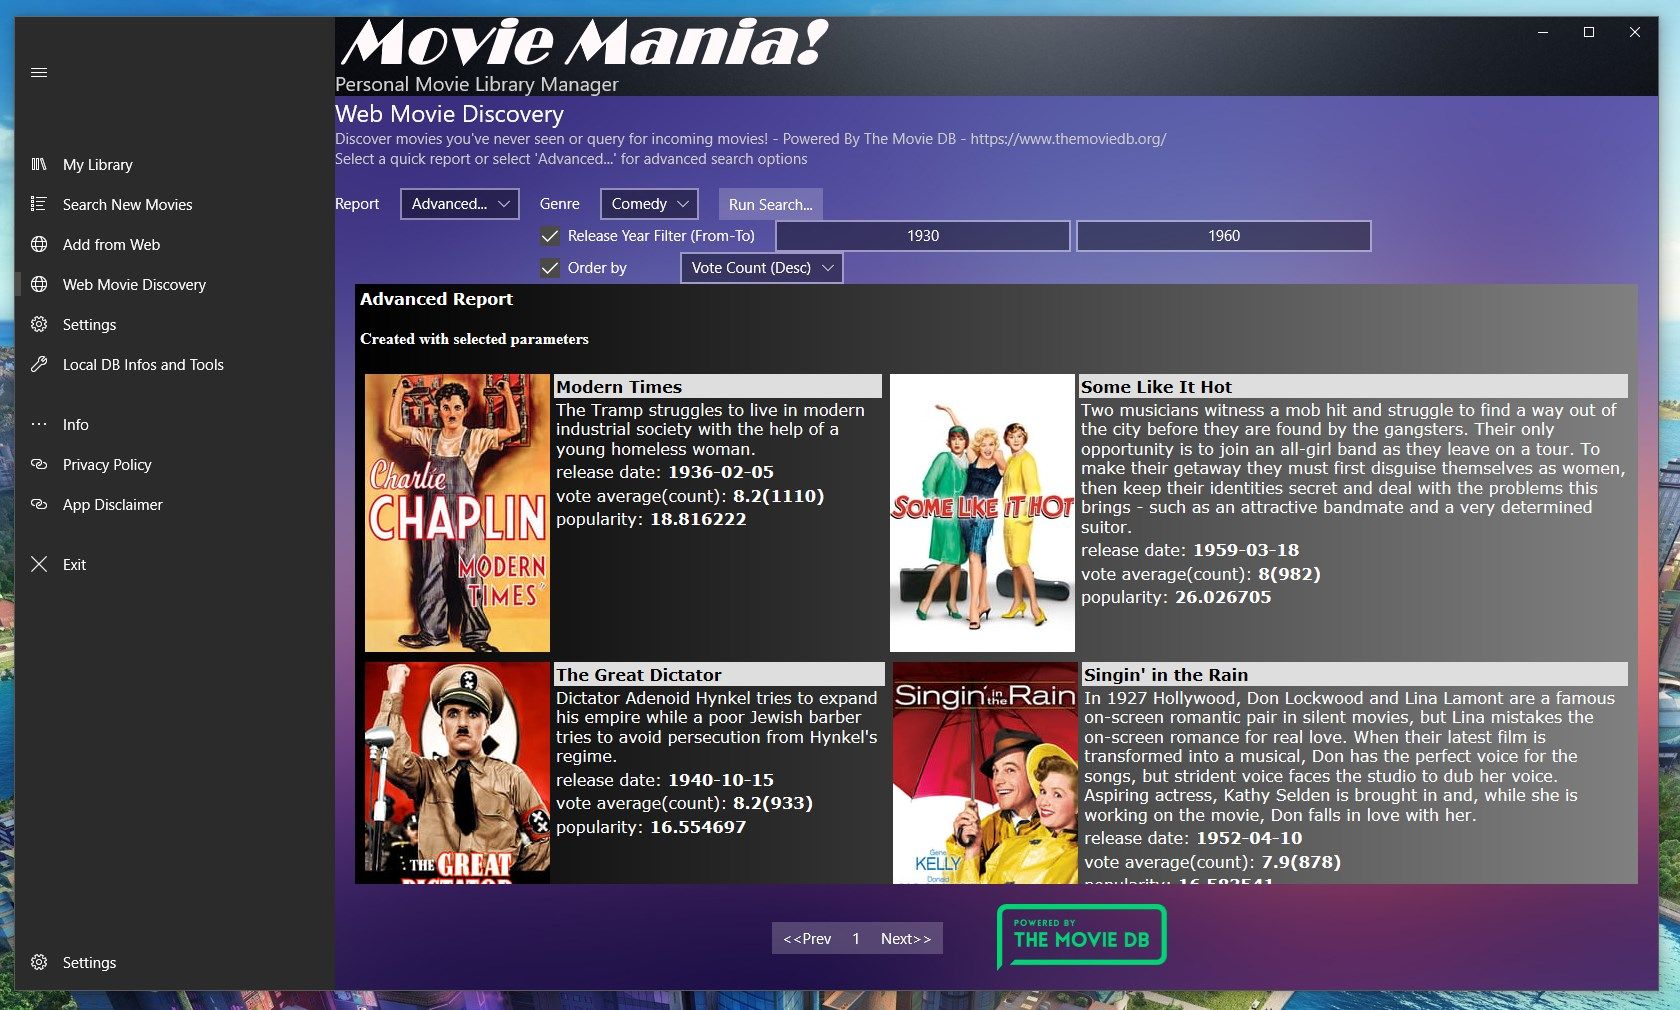 With Quick Reports and Advanced Search you can search for movies you've never seen or for incoming movies.